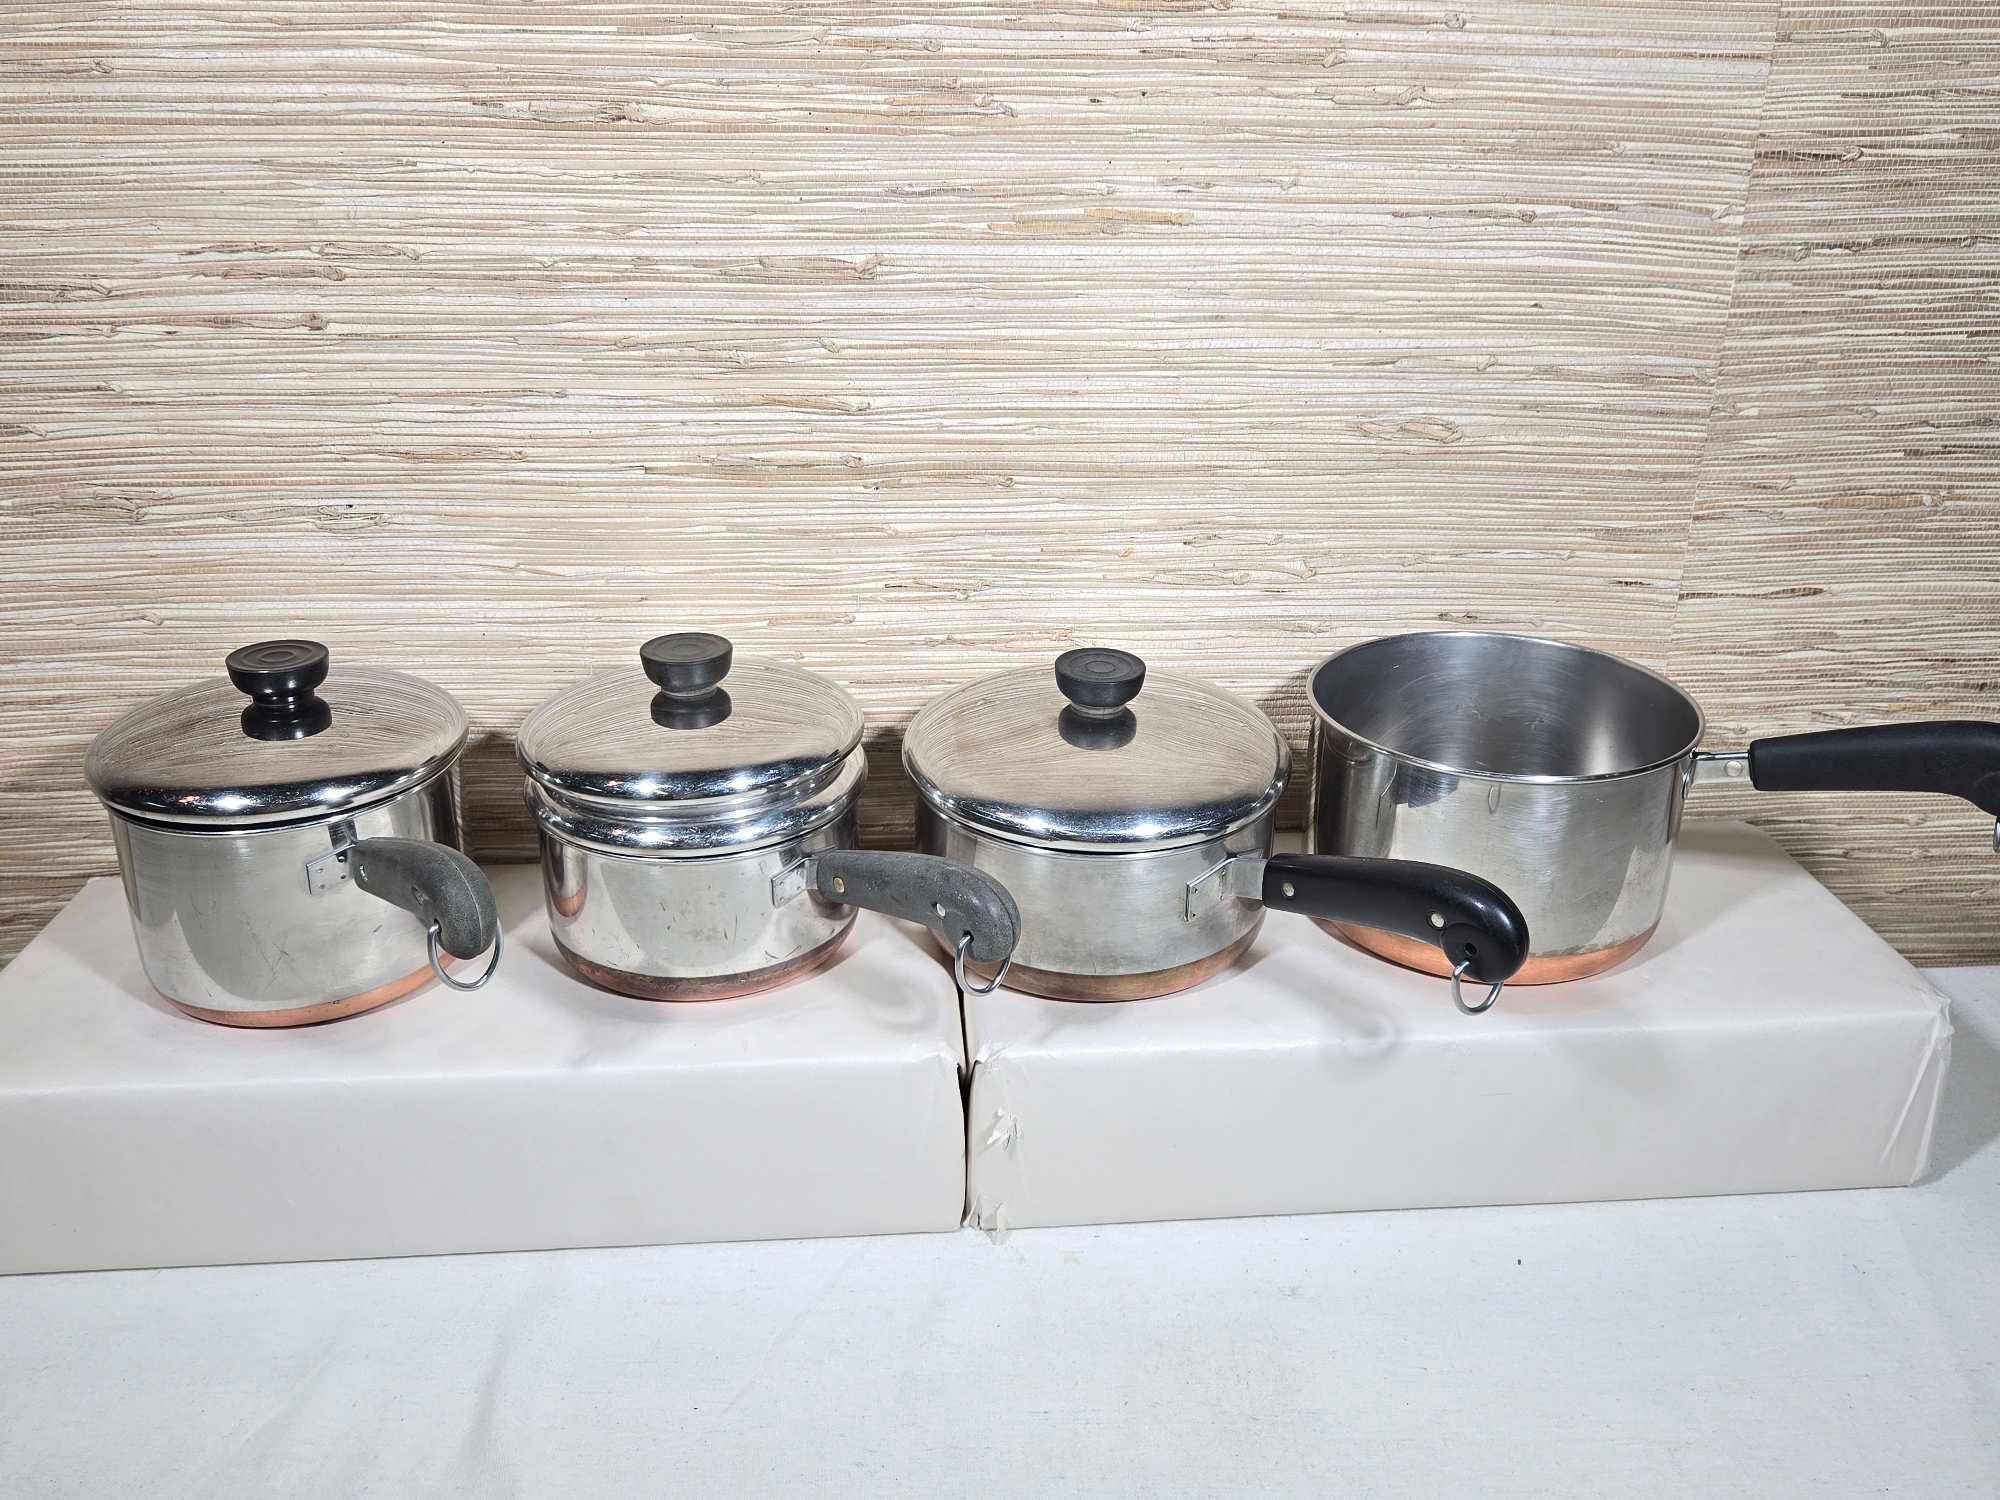 Vintage Revere Ware with Copper Bottoms